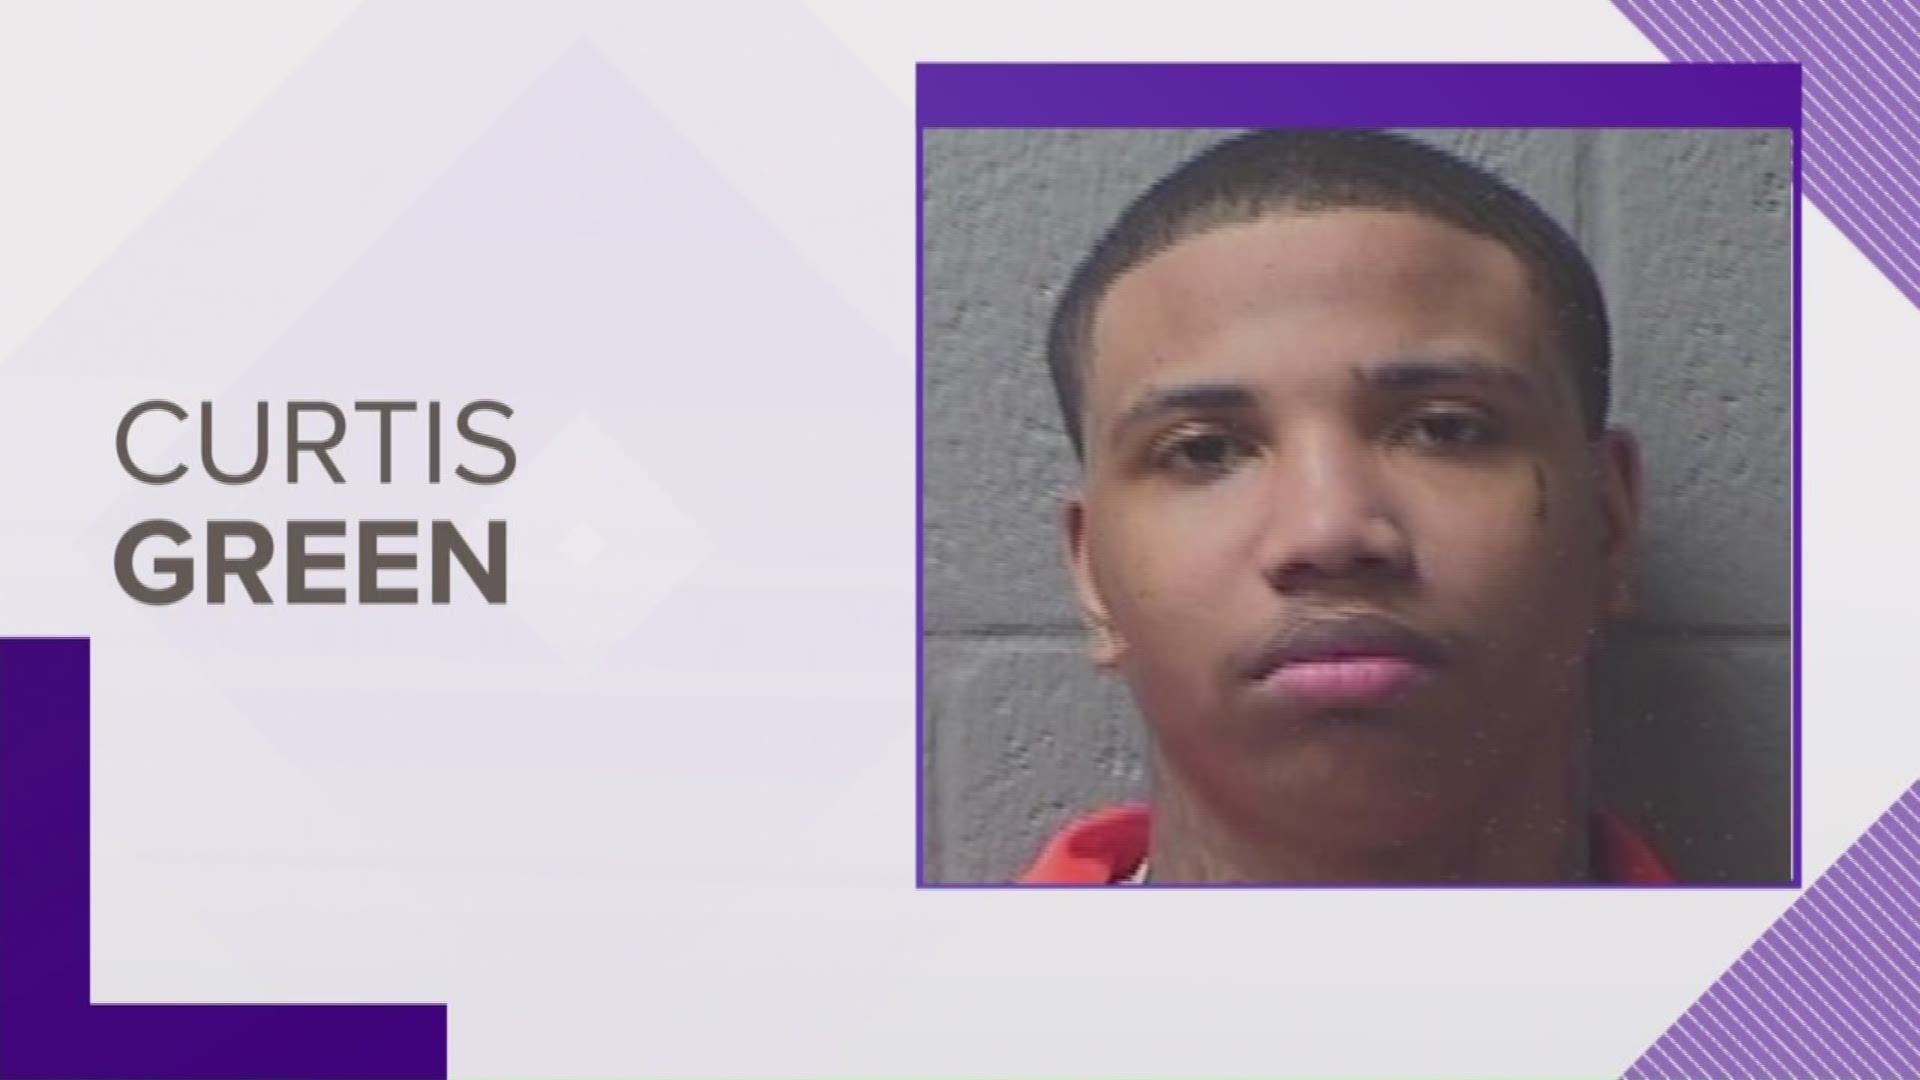 The Orangeburg County Sheriff's Office announced Thursday a $2,500 reward is being offered by U.S. Marshals for information leading to Green's arrest. Marshals say he should be considered armed and dangerous.